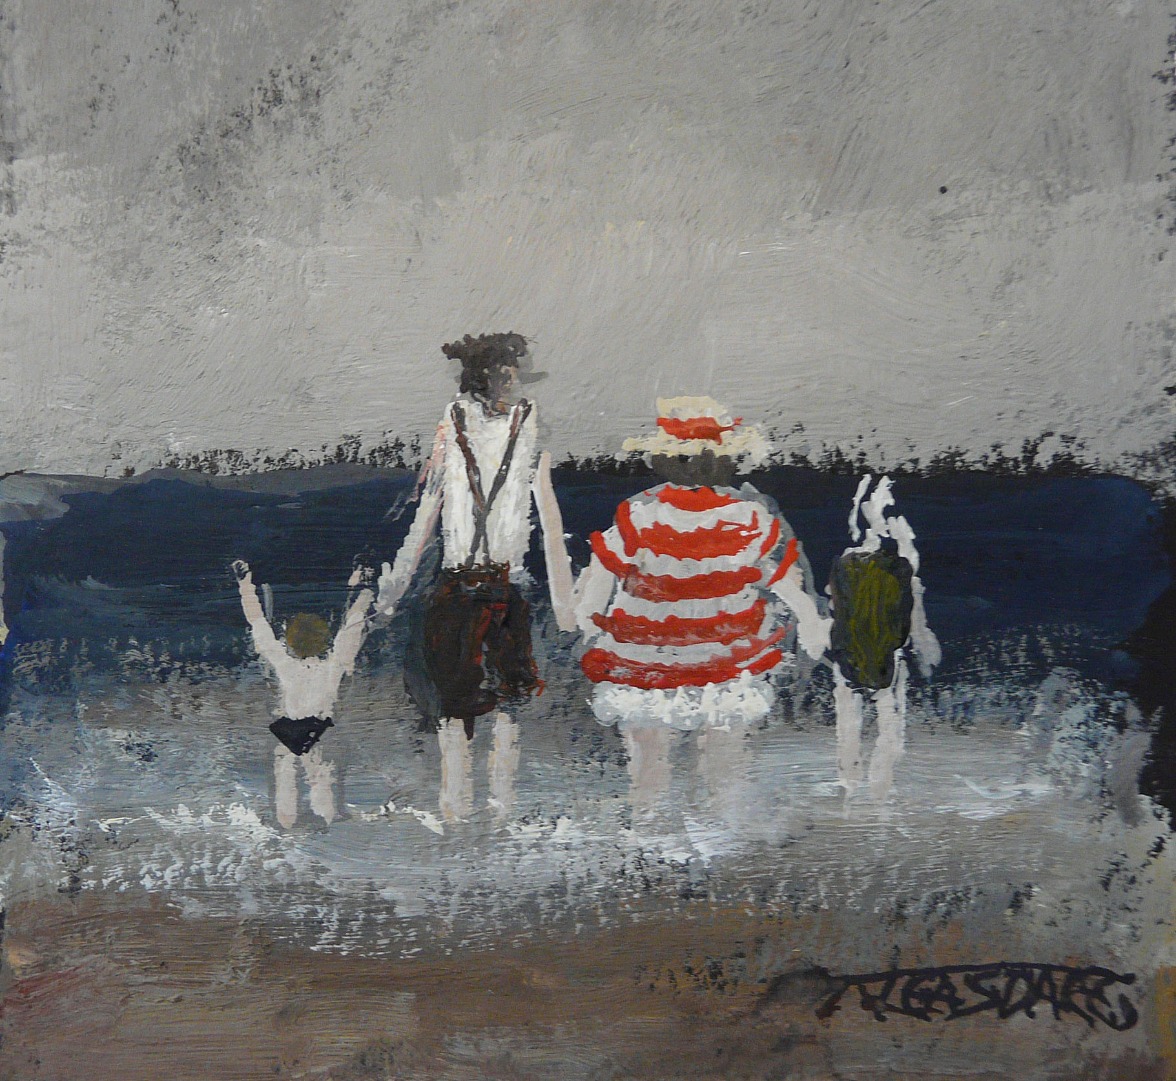 Testing the Water by Malcolm Teasdale, Water | Sea | Family | Northern | Nostalgic